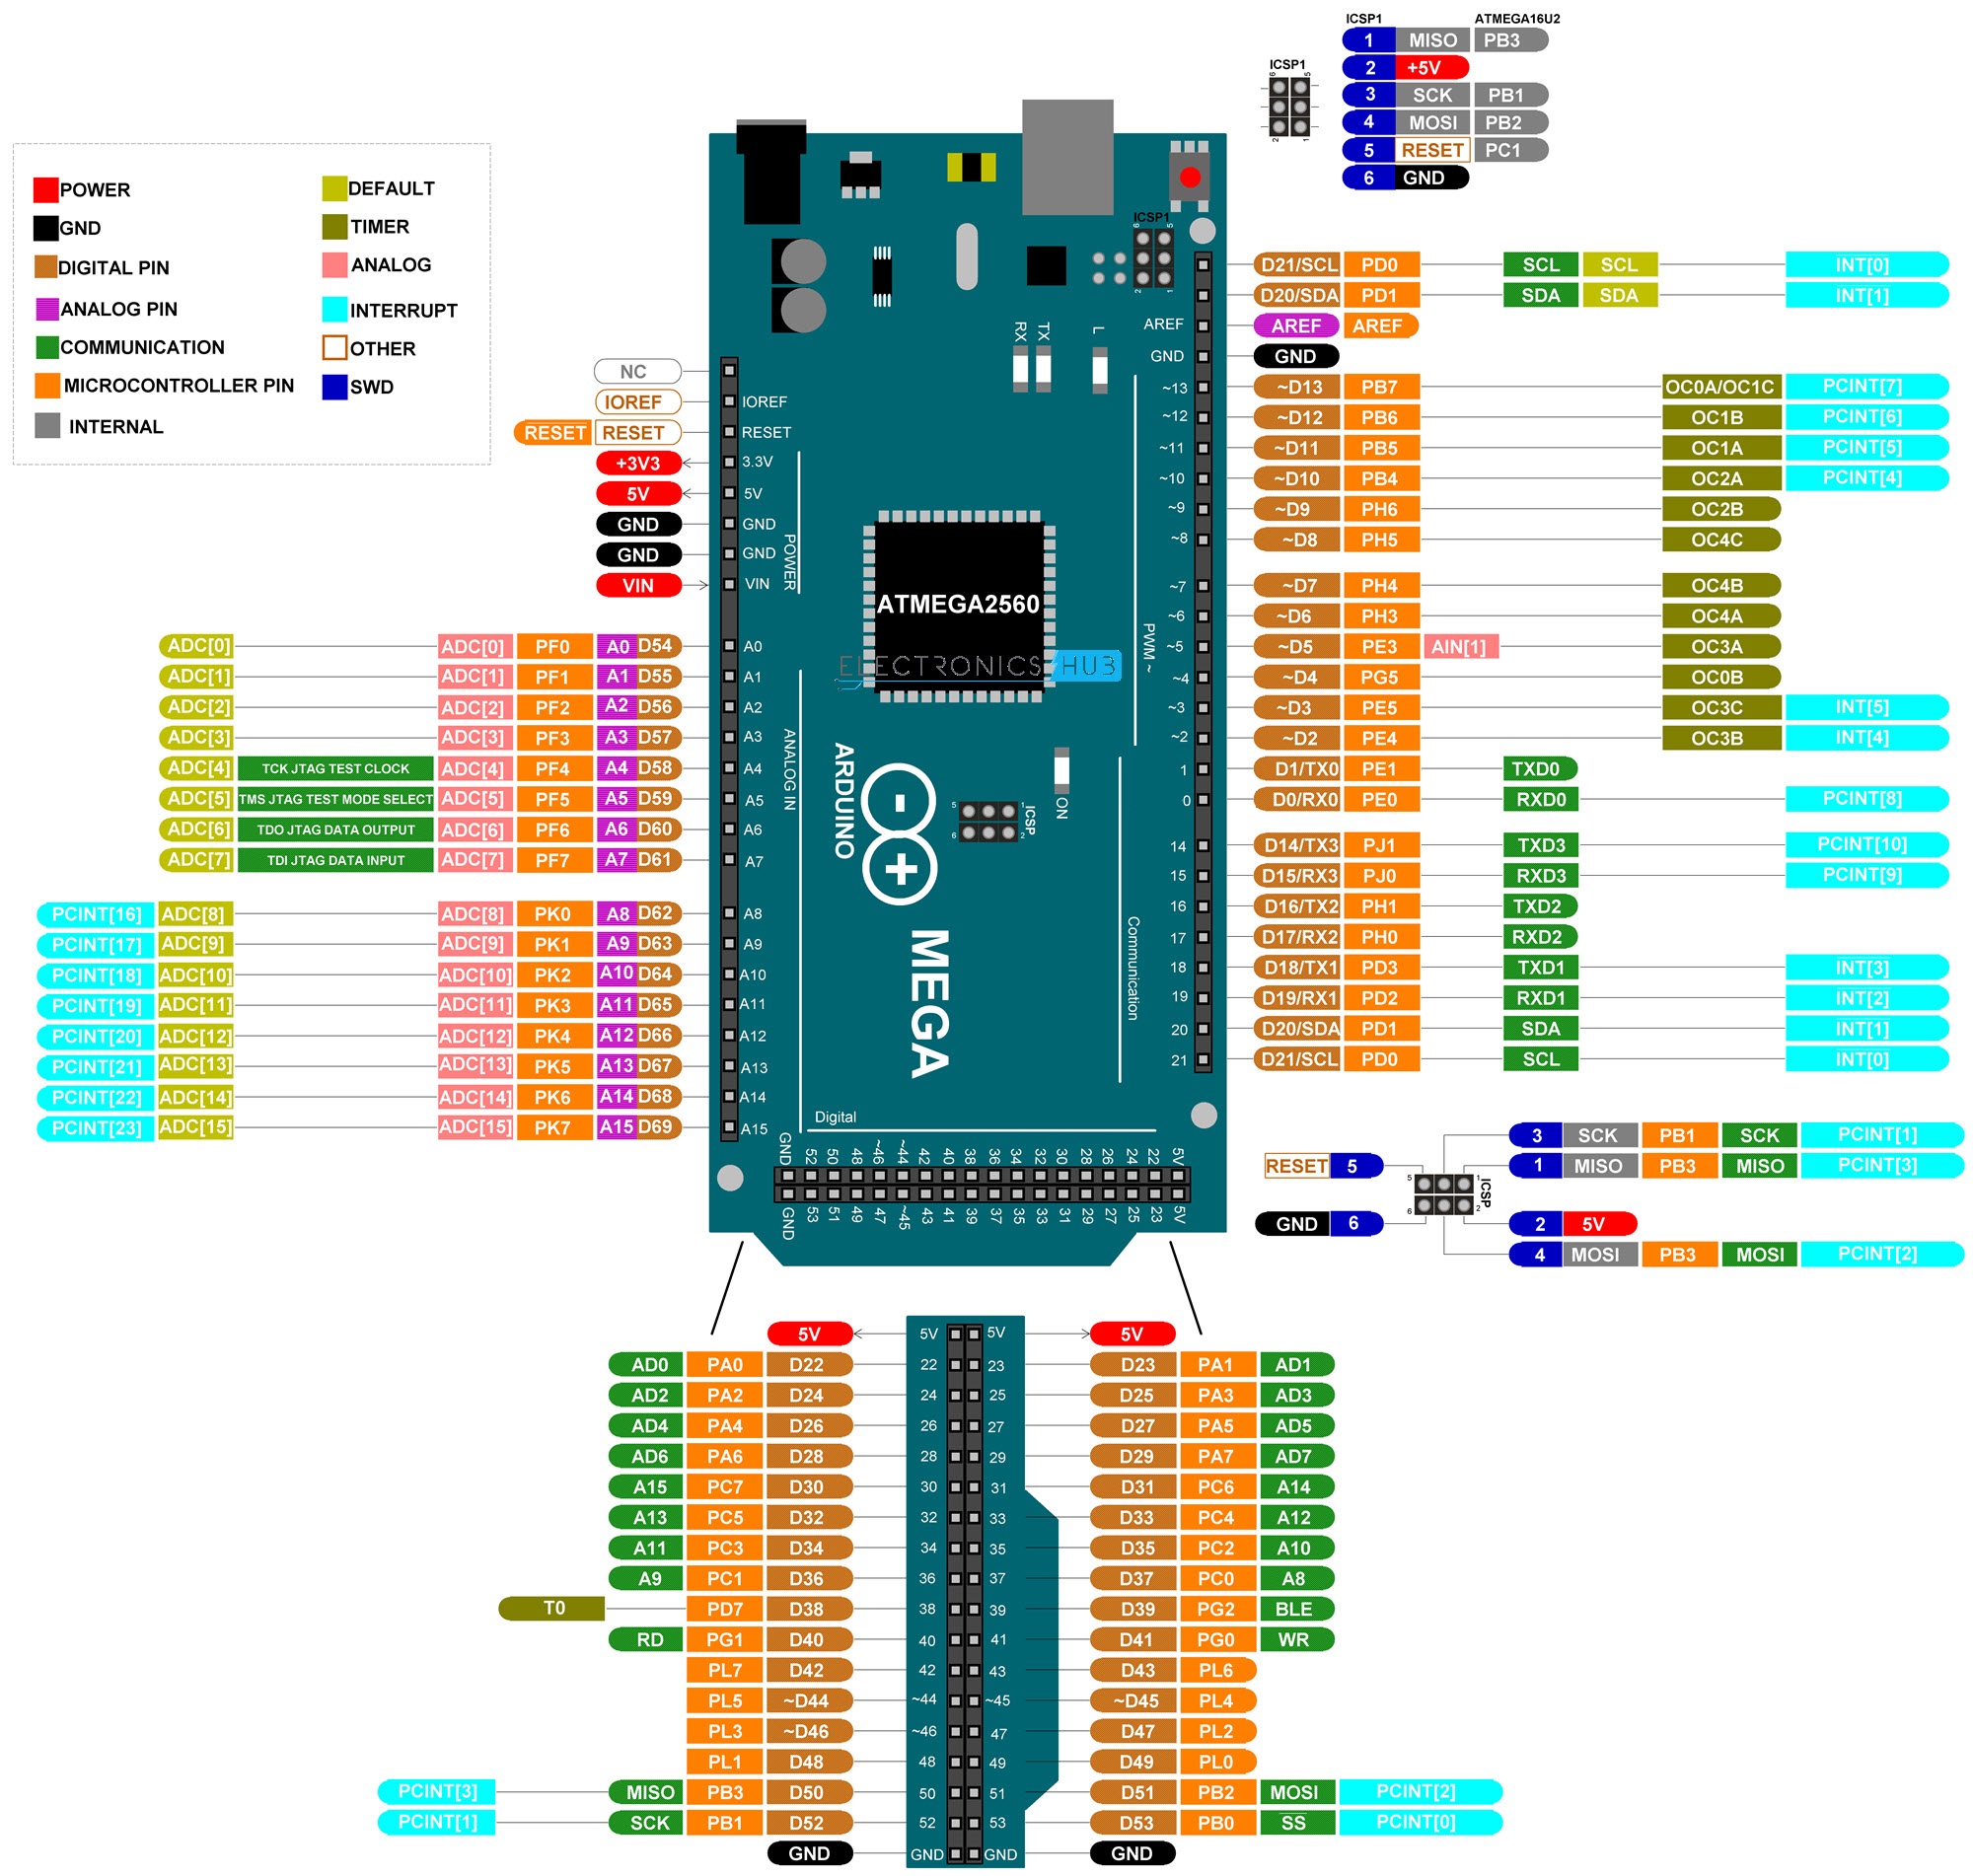 flap From actress Arduino Mega Pinout | Arduino Mega 2560 Layout, Specifications